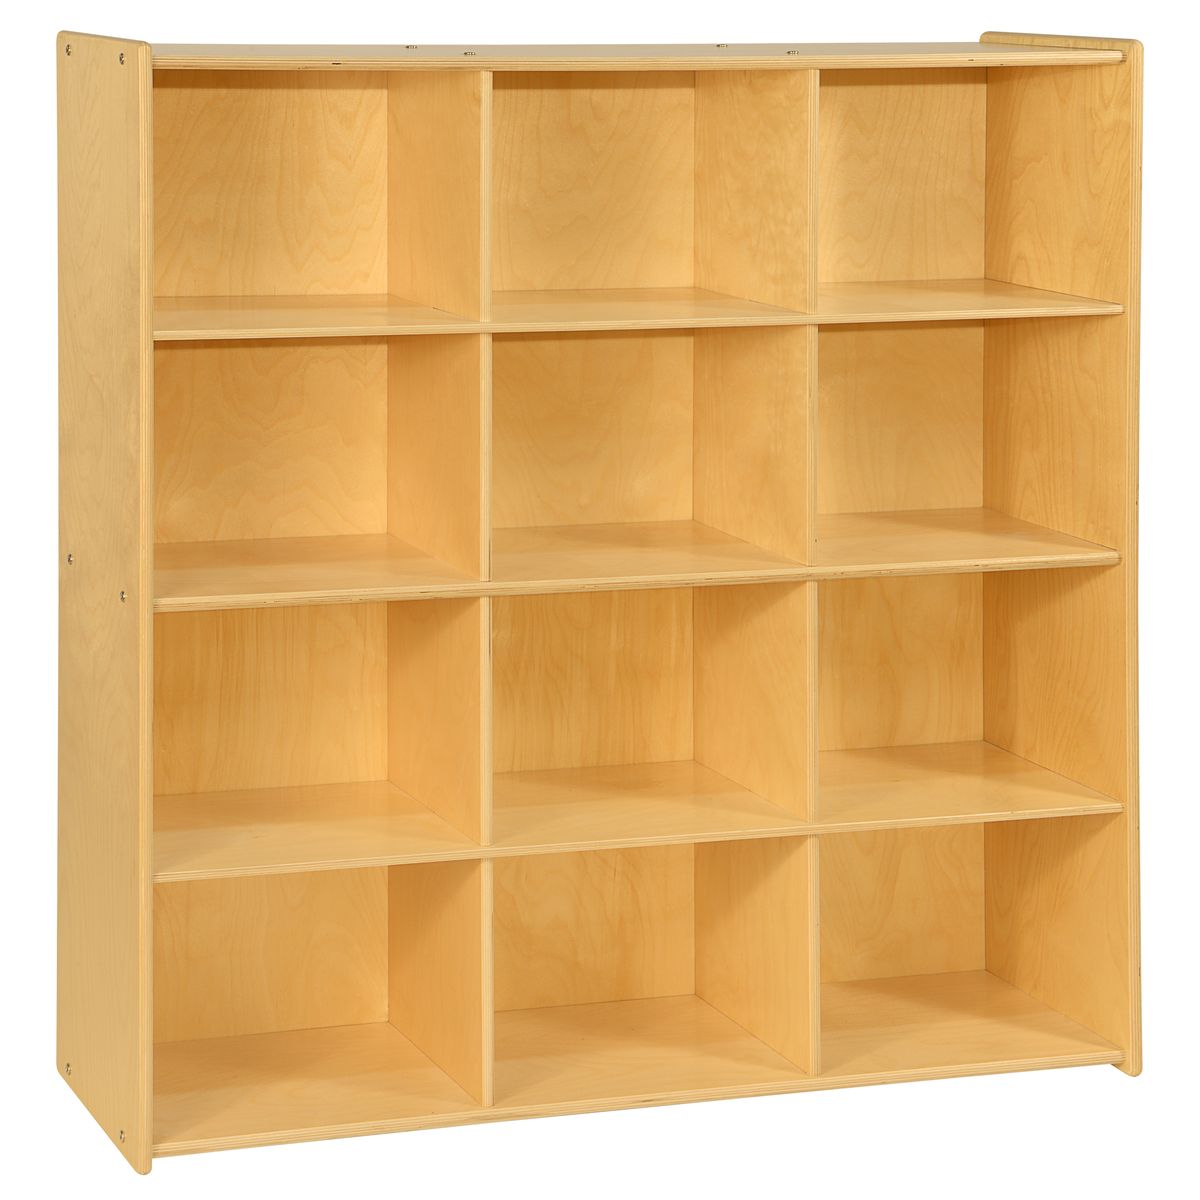 Picture of Contender C50912F Big Cubby Storage with 12 Cubbies - Assembled